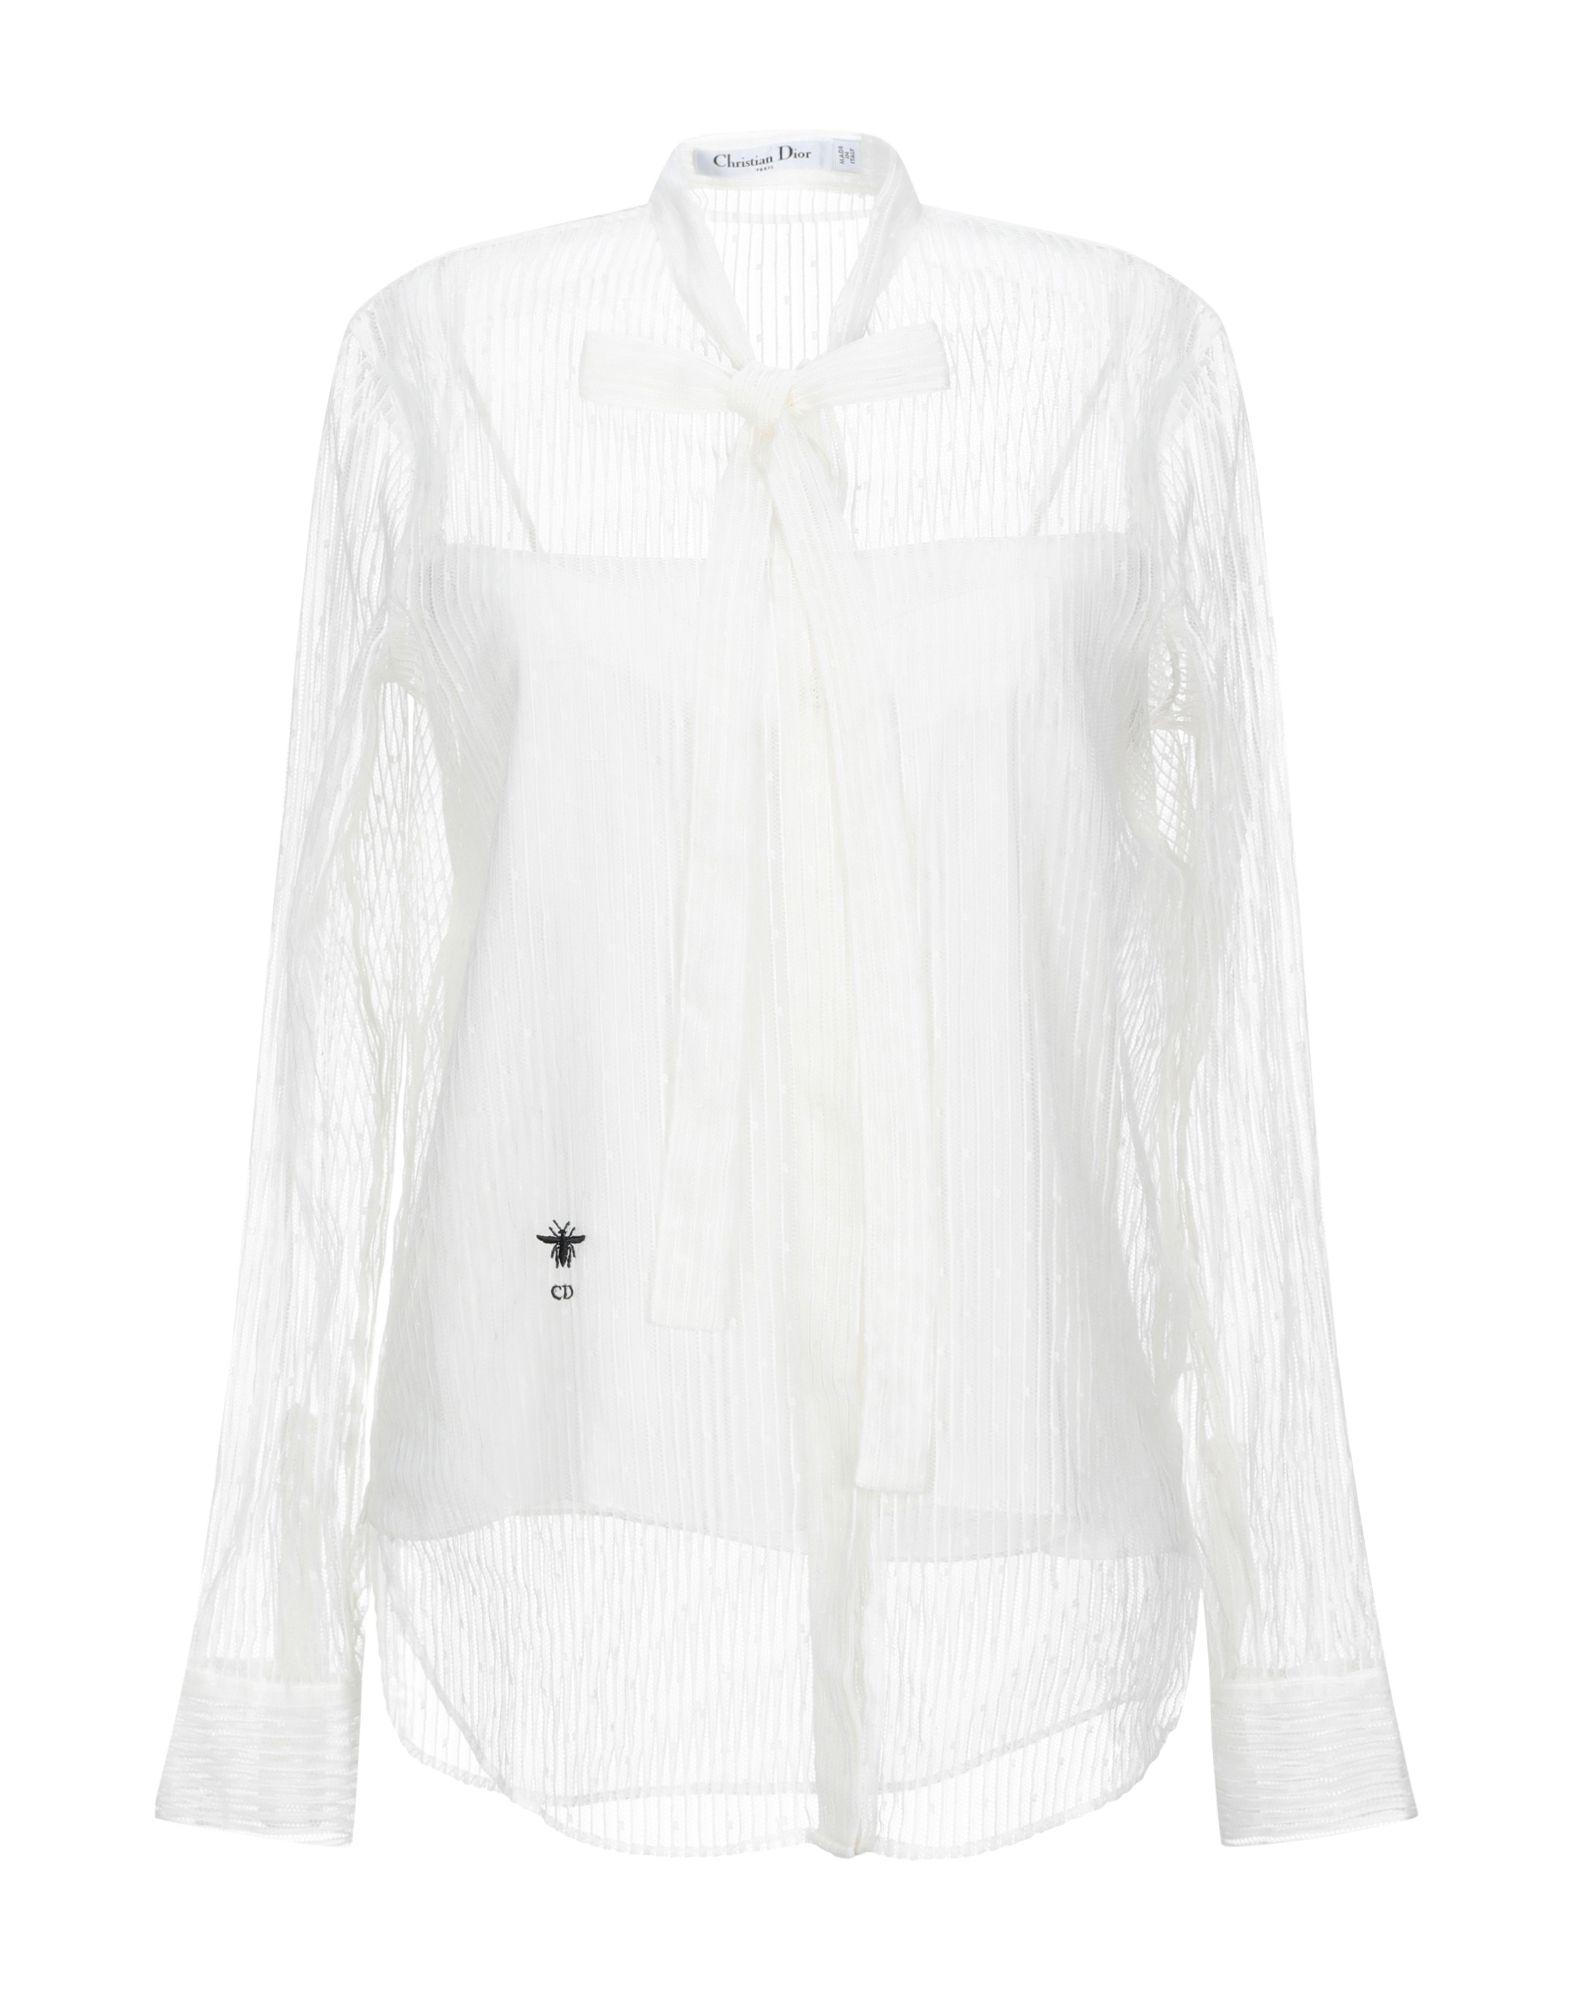 Dior Tulle Shirt in Ivory (White) - Lyst